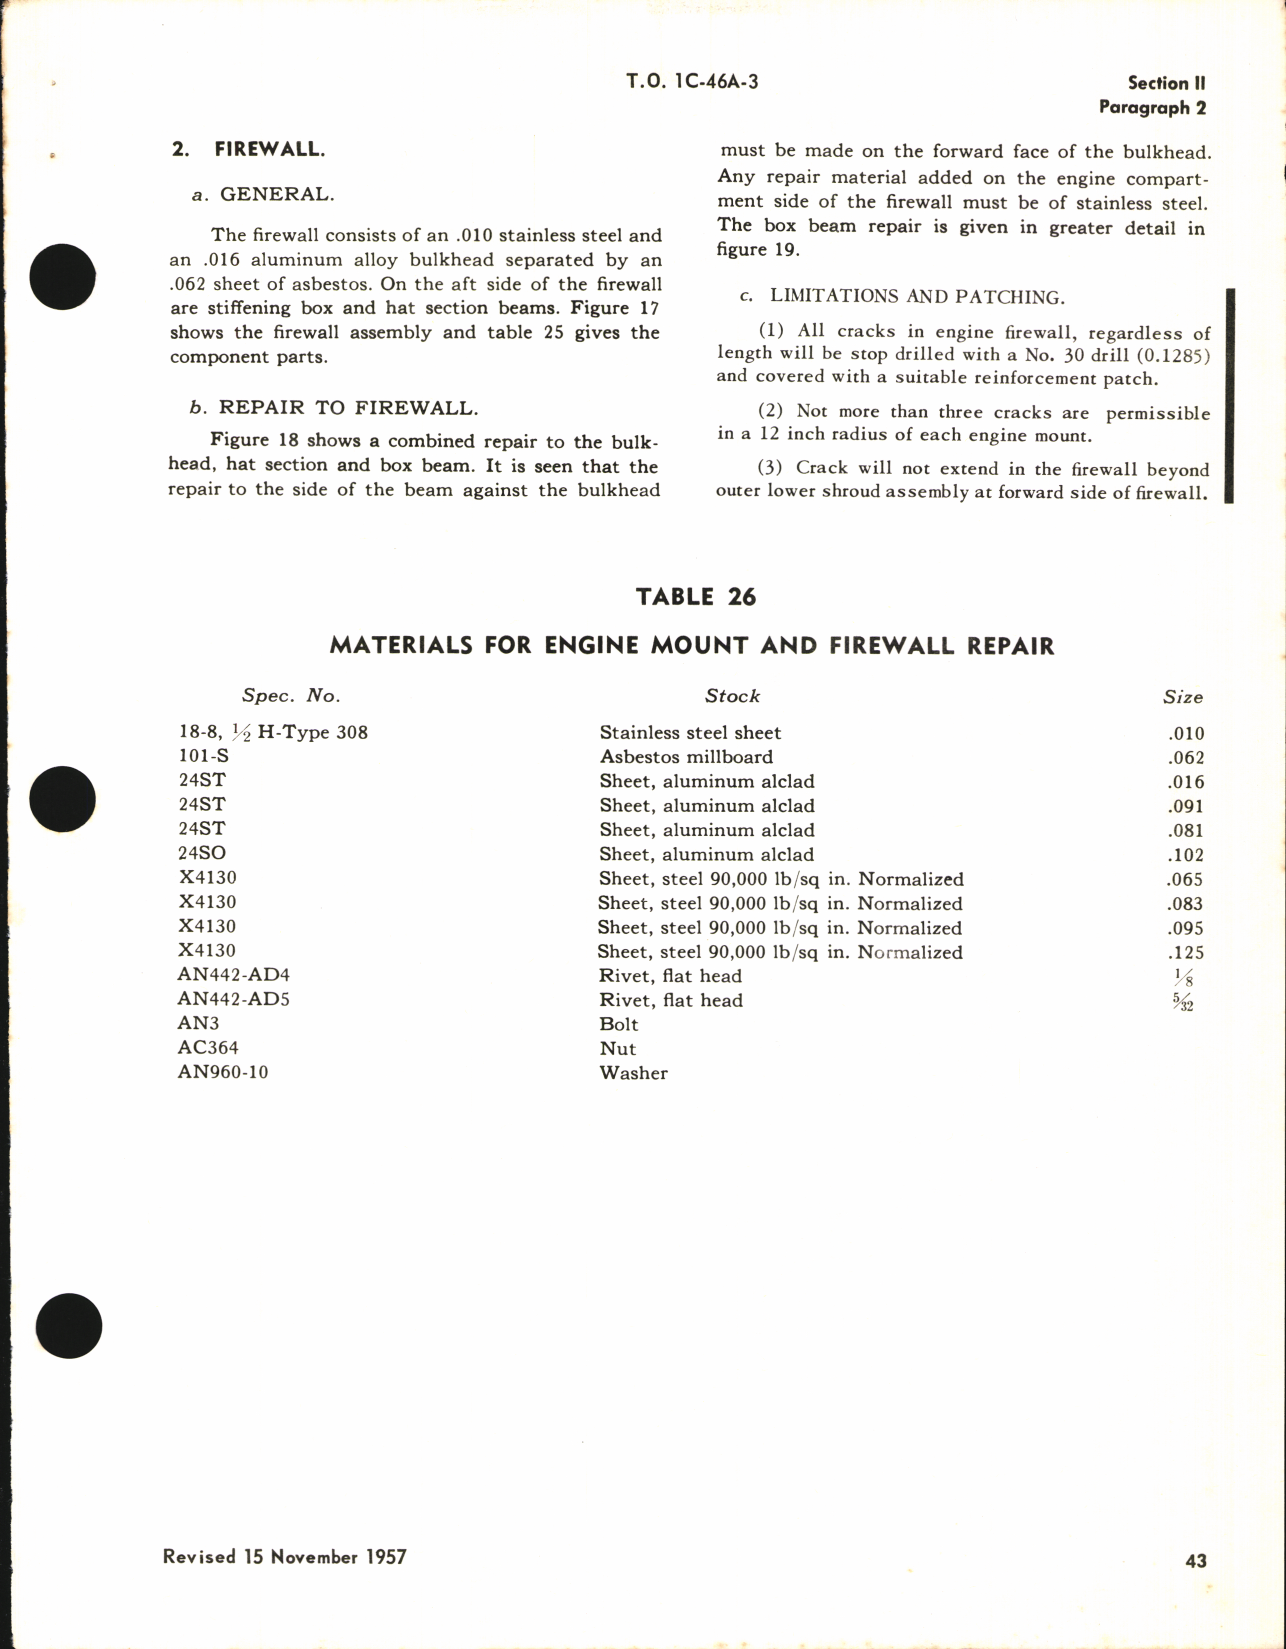 Sample page 5 from AirCorps Library document: Structural Repair Instructions for C-46, ZC-46A, C-46D, and C-46F